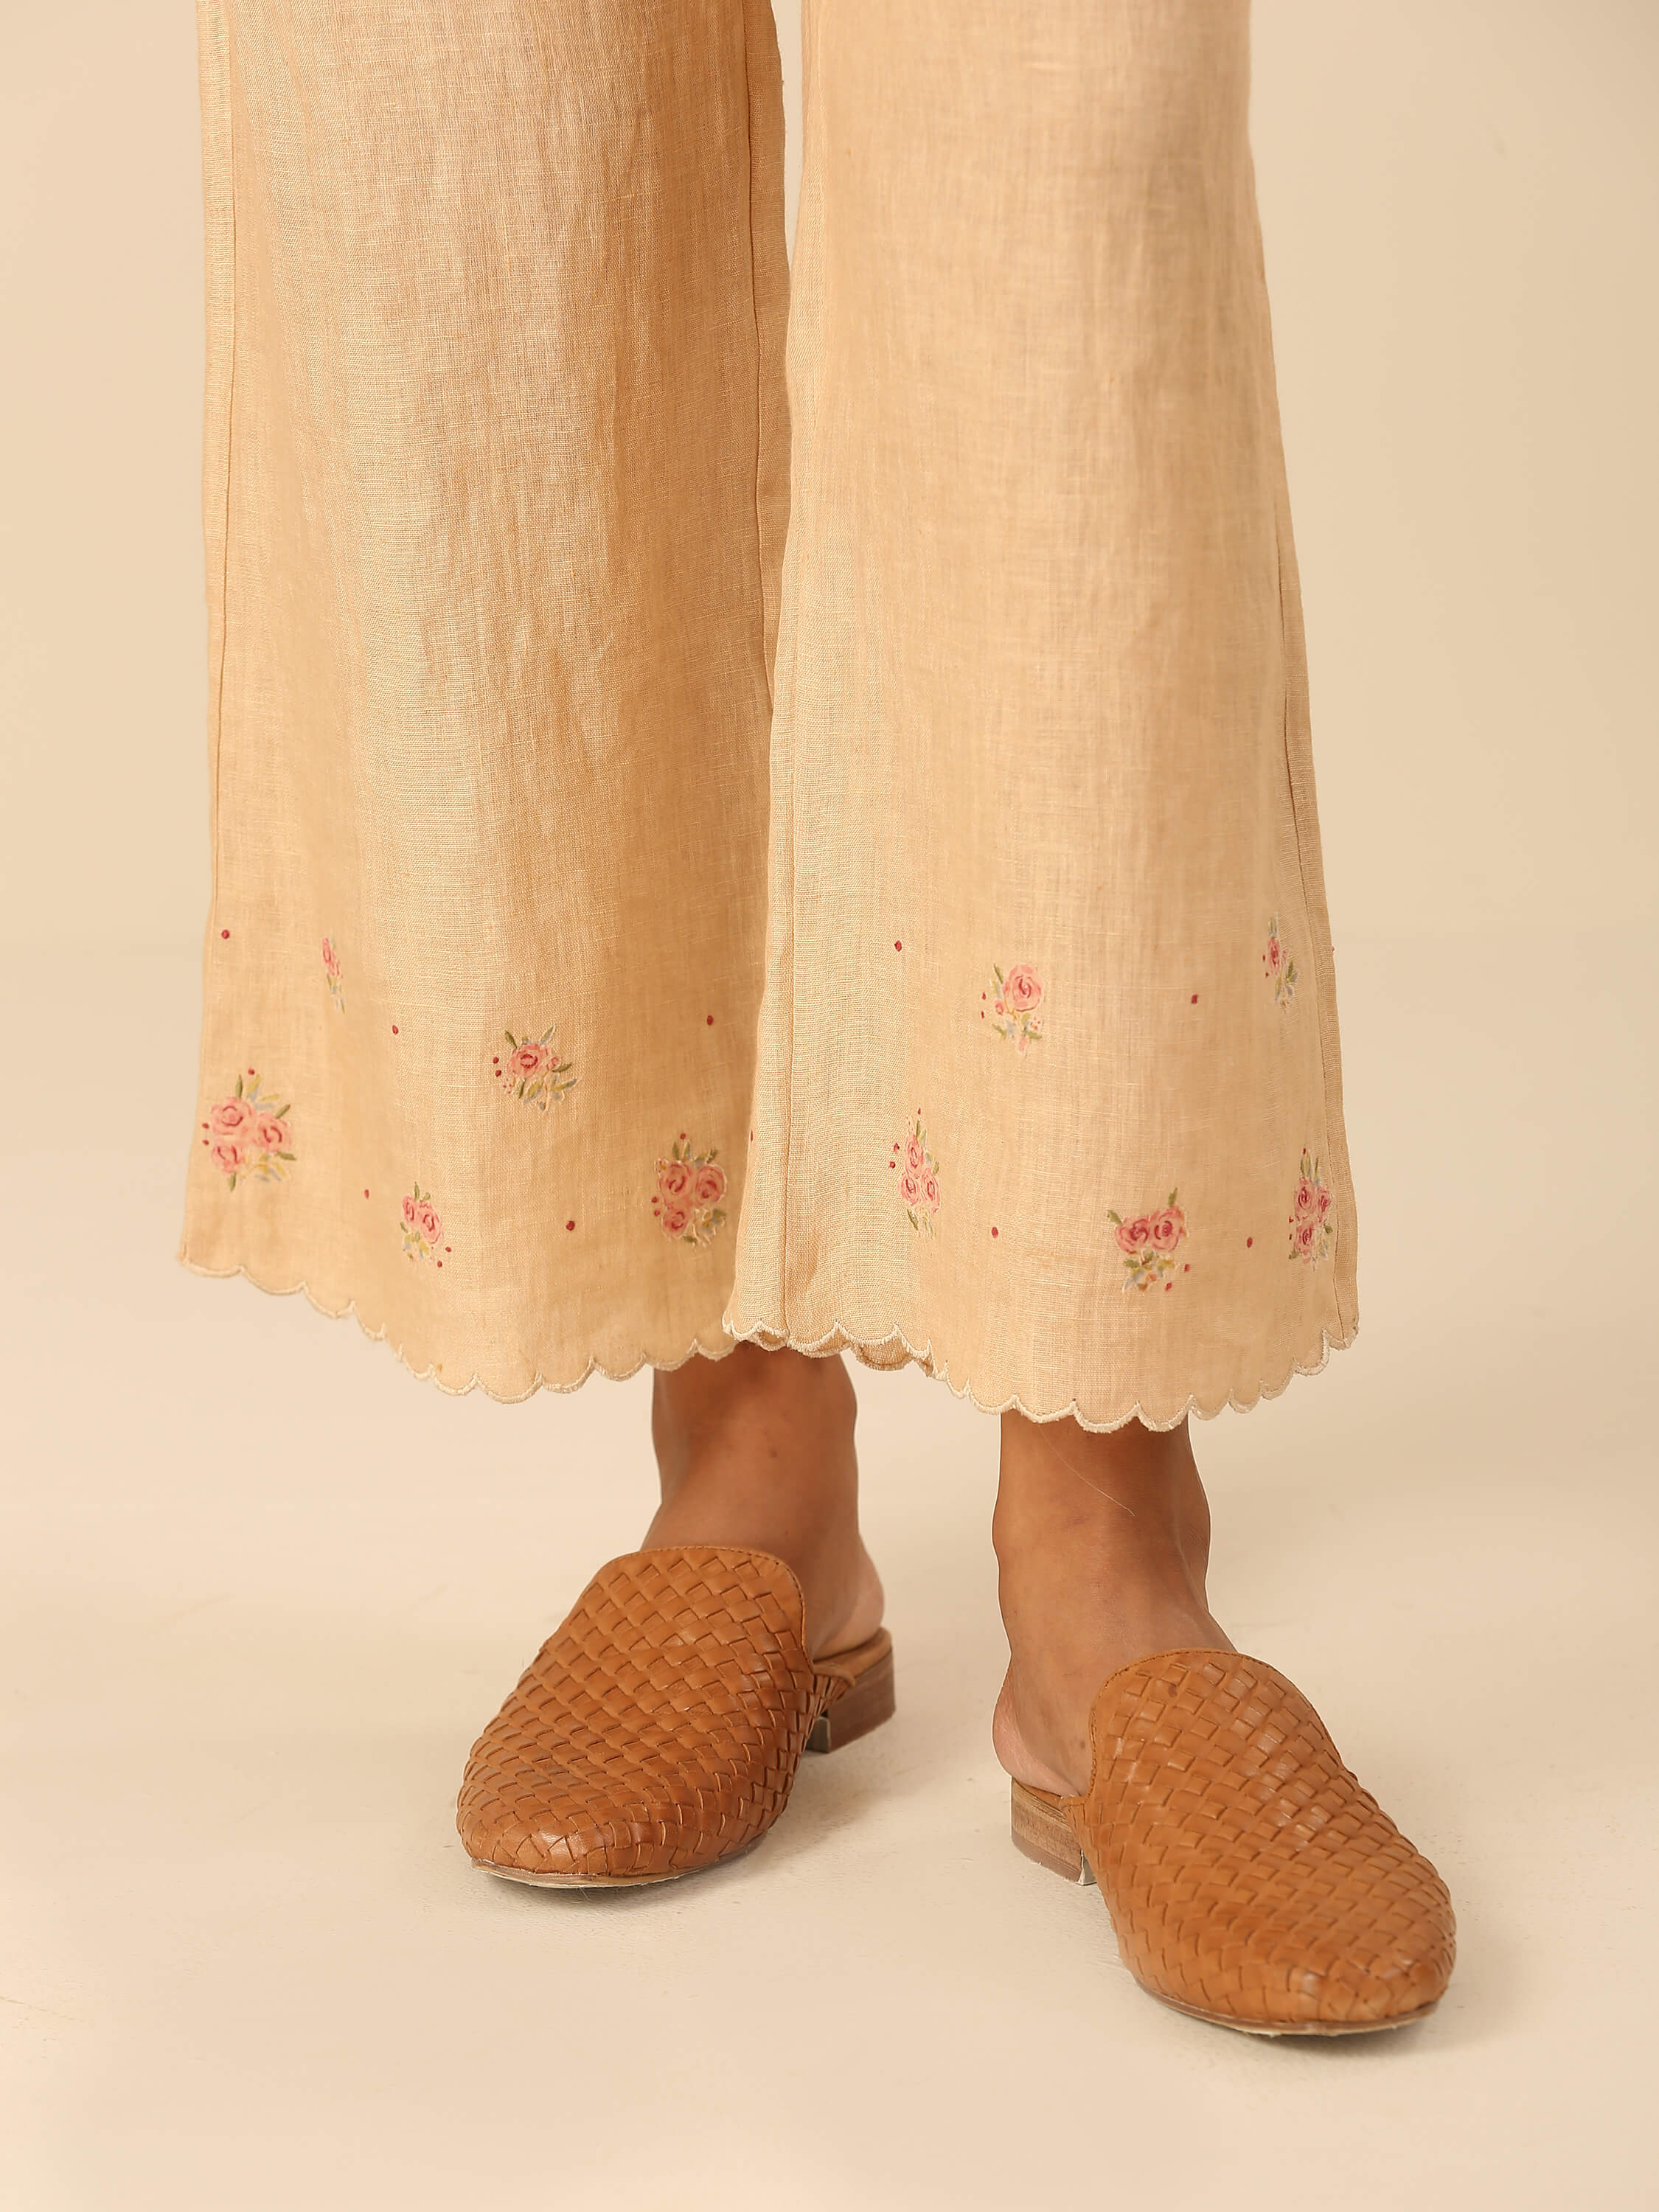 Close-up of embroidered palazzo pants with woven brown slip-on shoes.